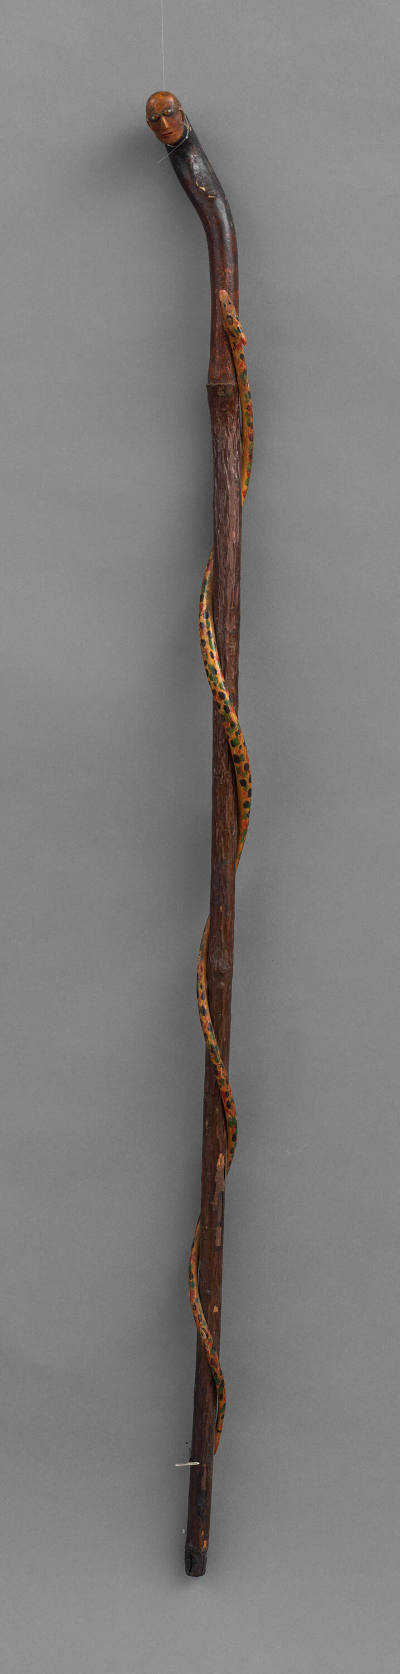 Artist unidentified, “Wood Cane with Painted Head and Spotted Snake”, United States, n.d., Wood…